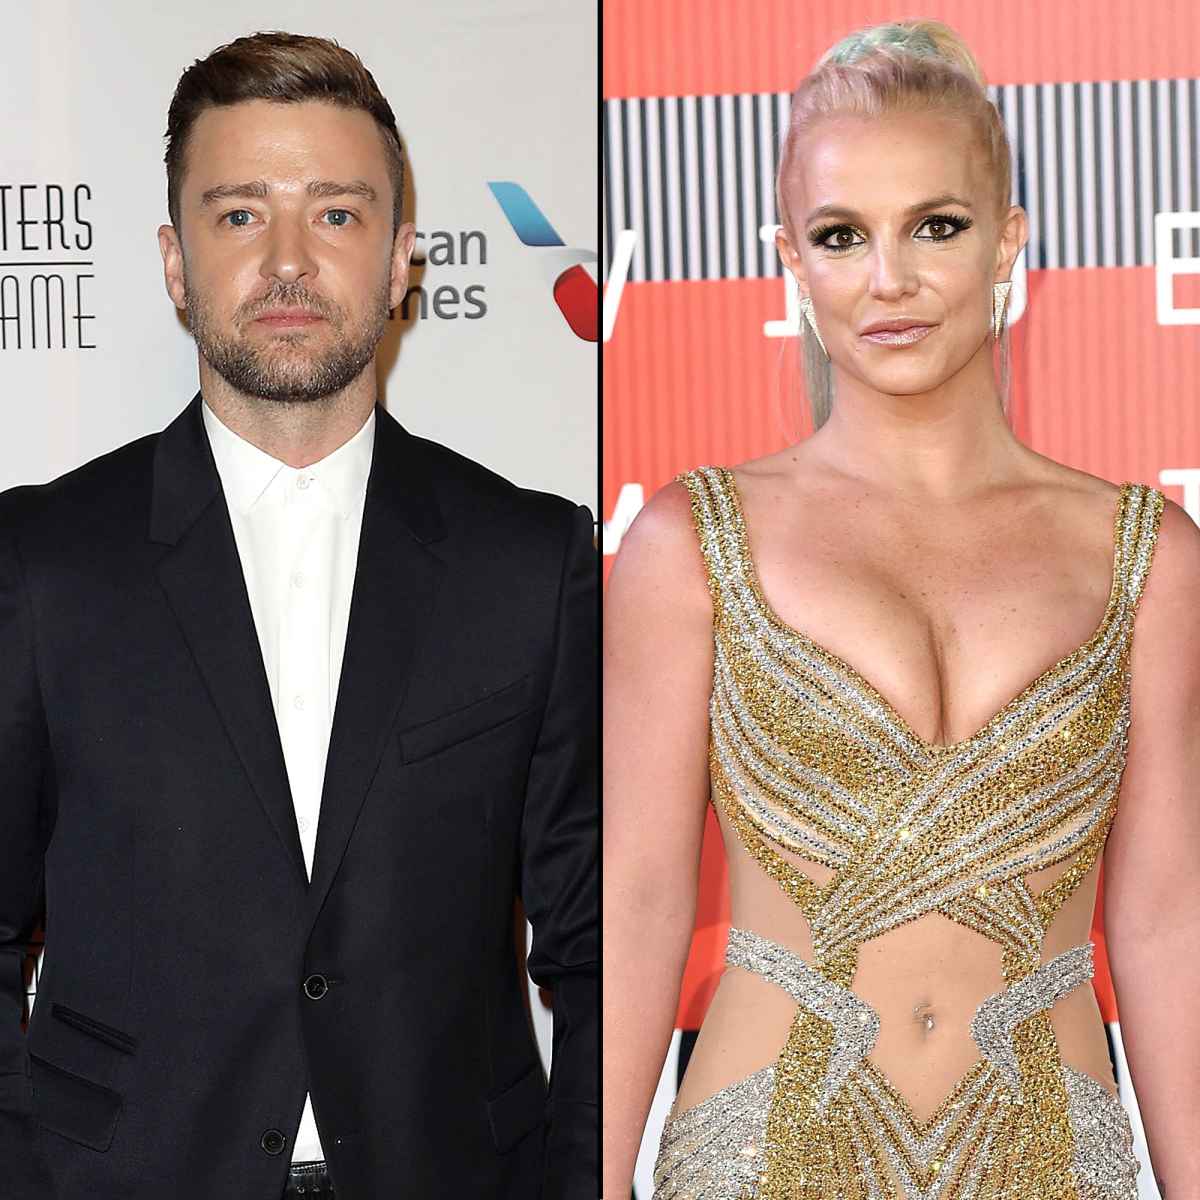 Justin Timberlake Supports Britney Spears After Conservatorship